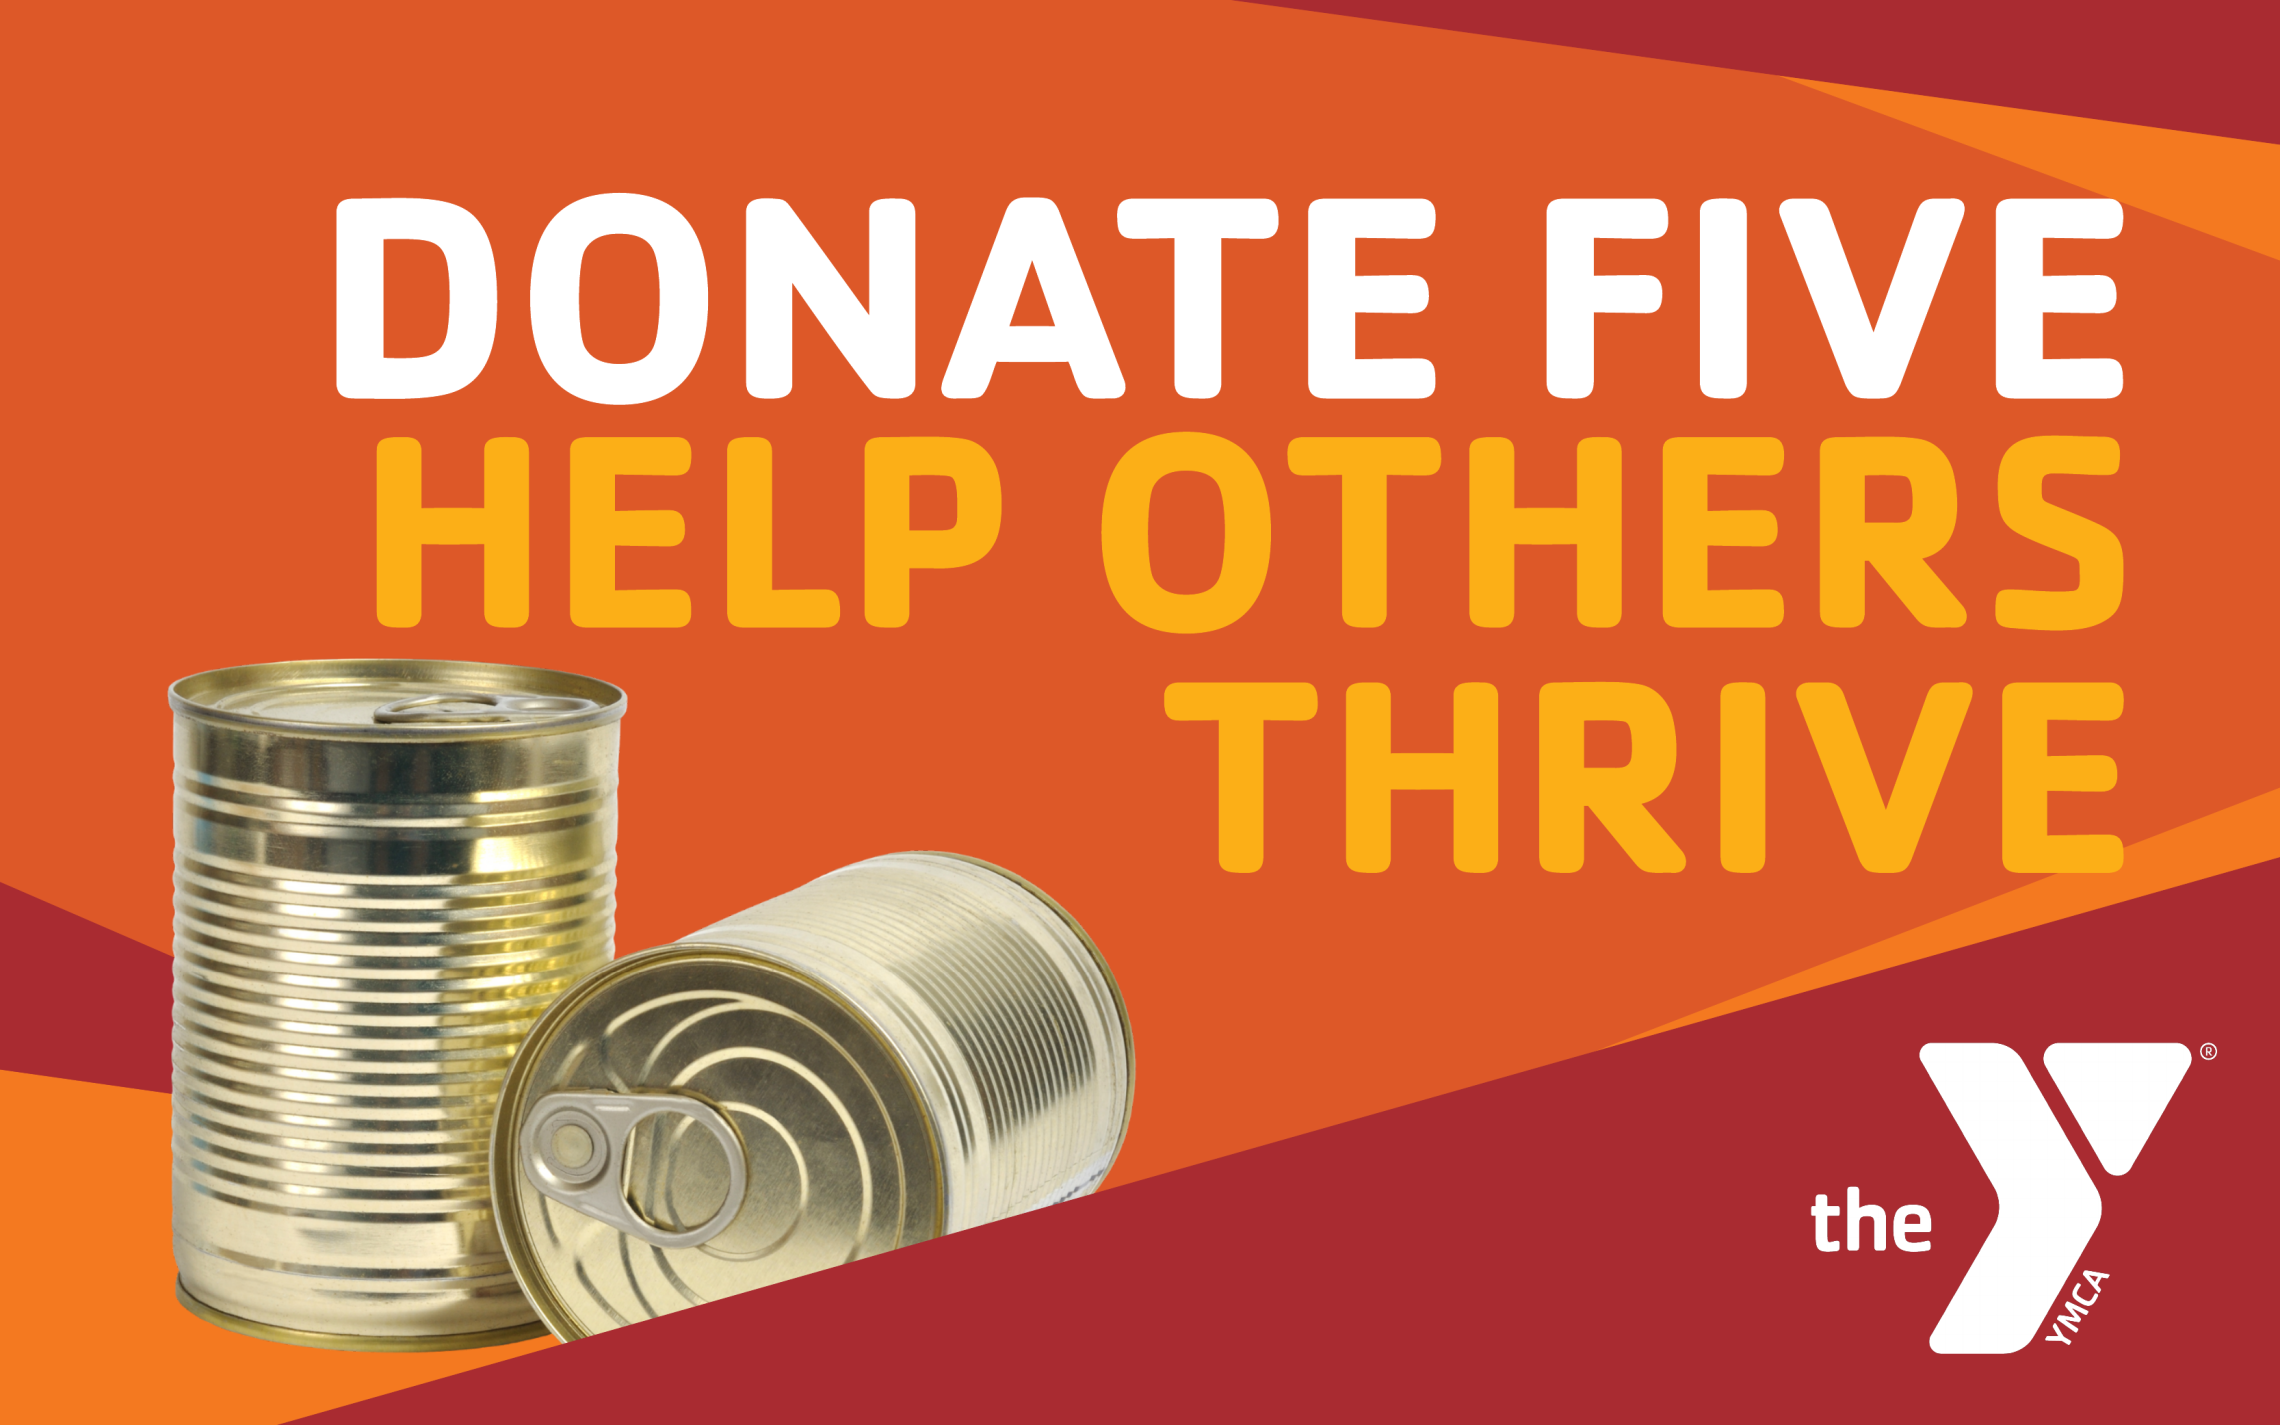 donate 5 help others thrive campaign image